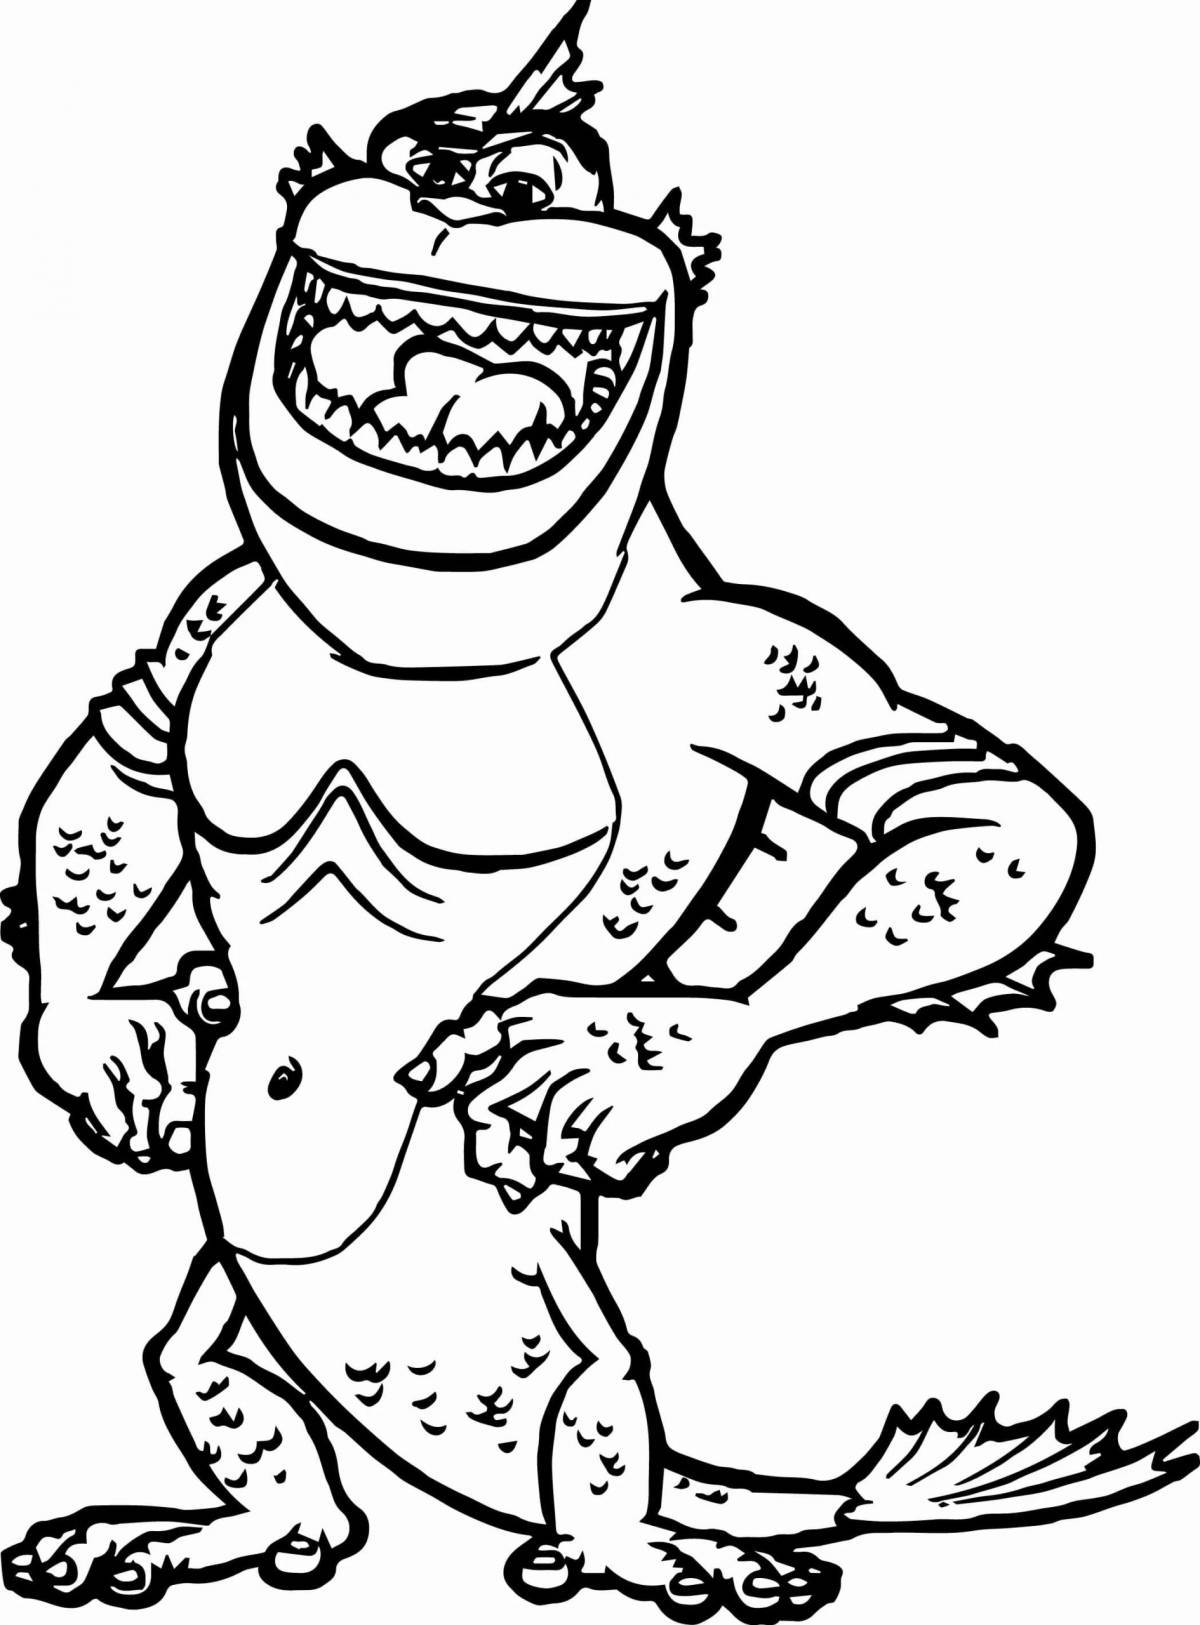 Fancy monster coloring pages